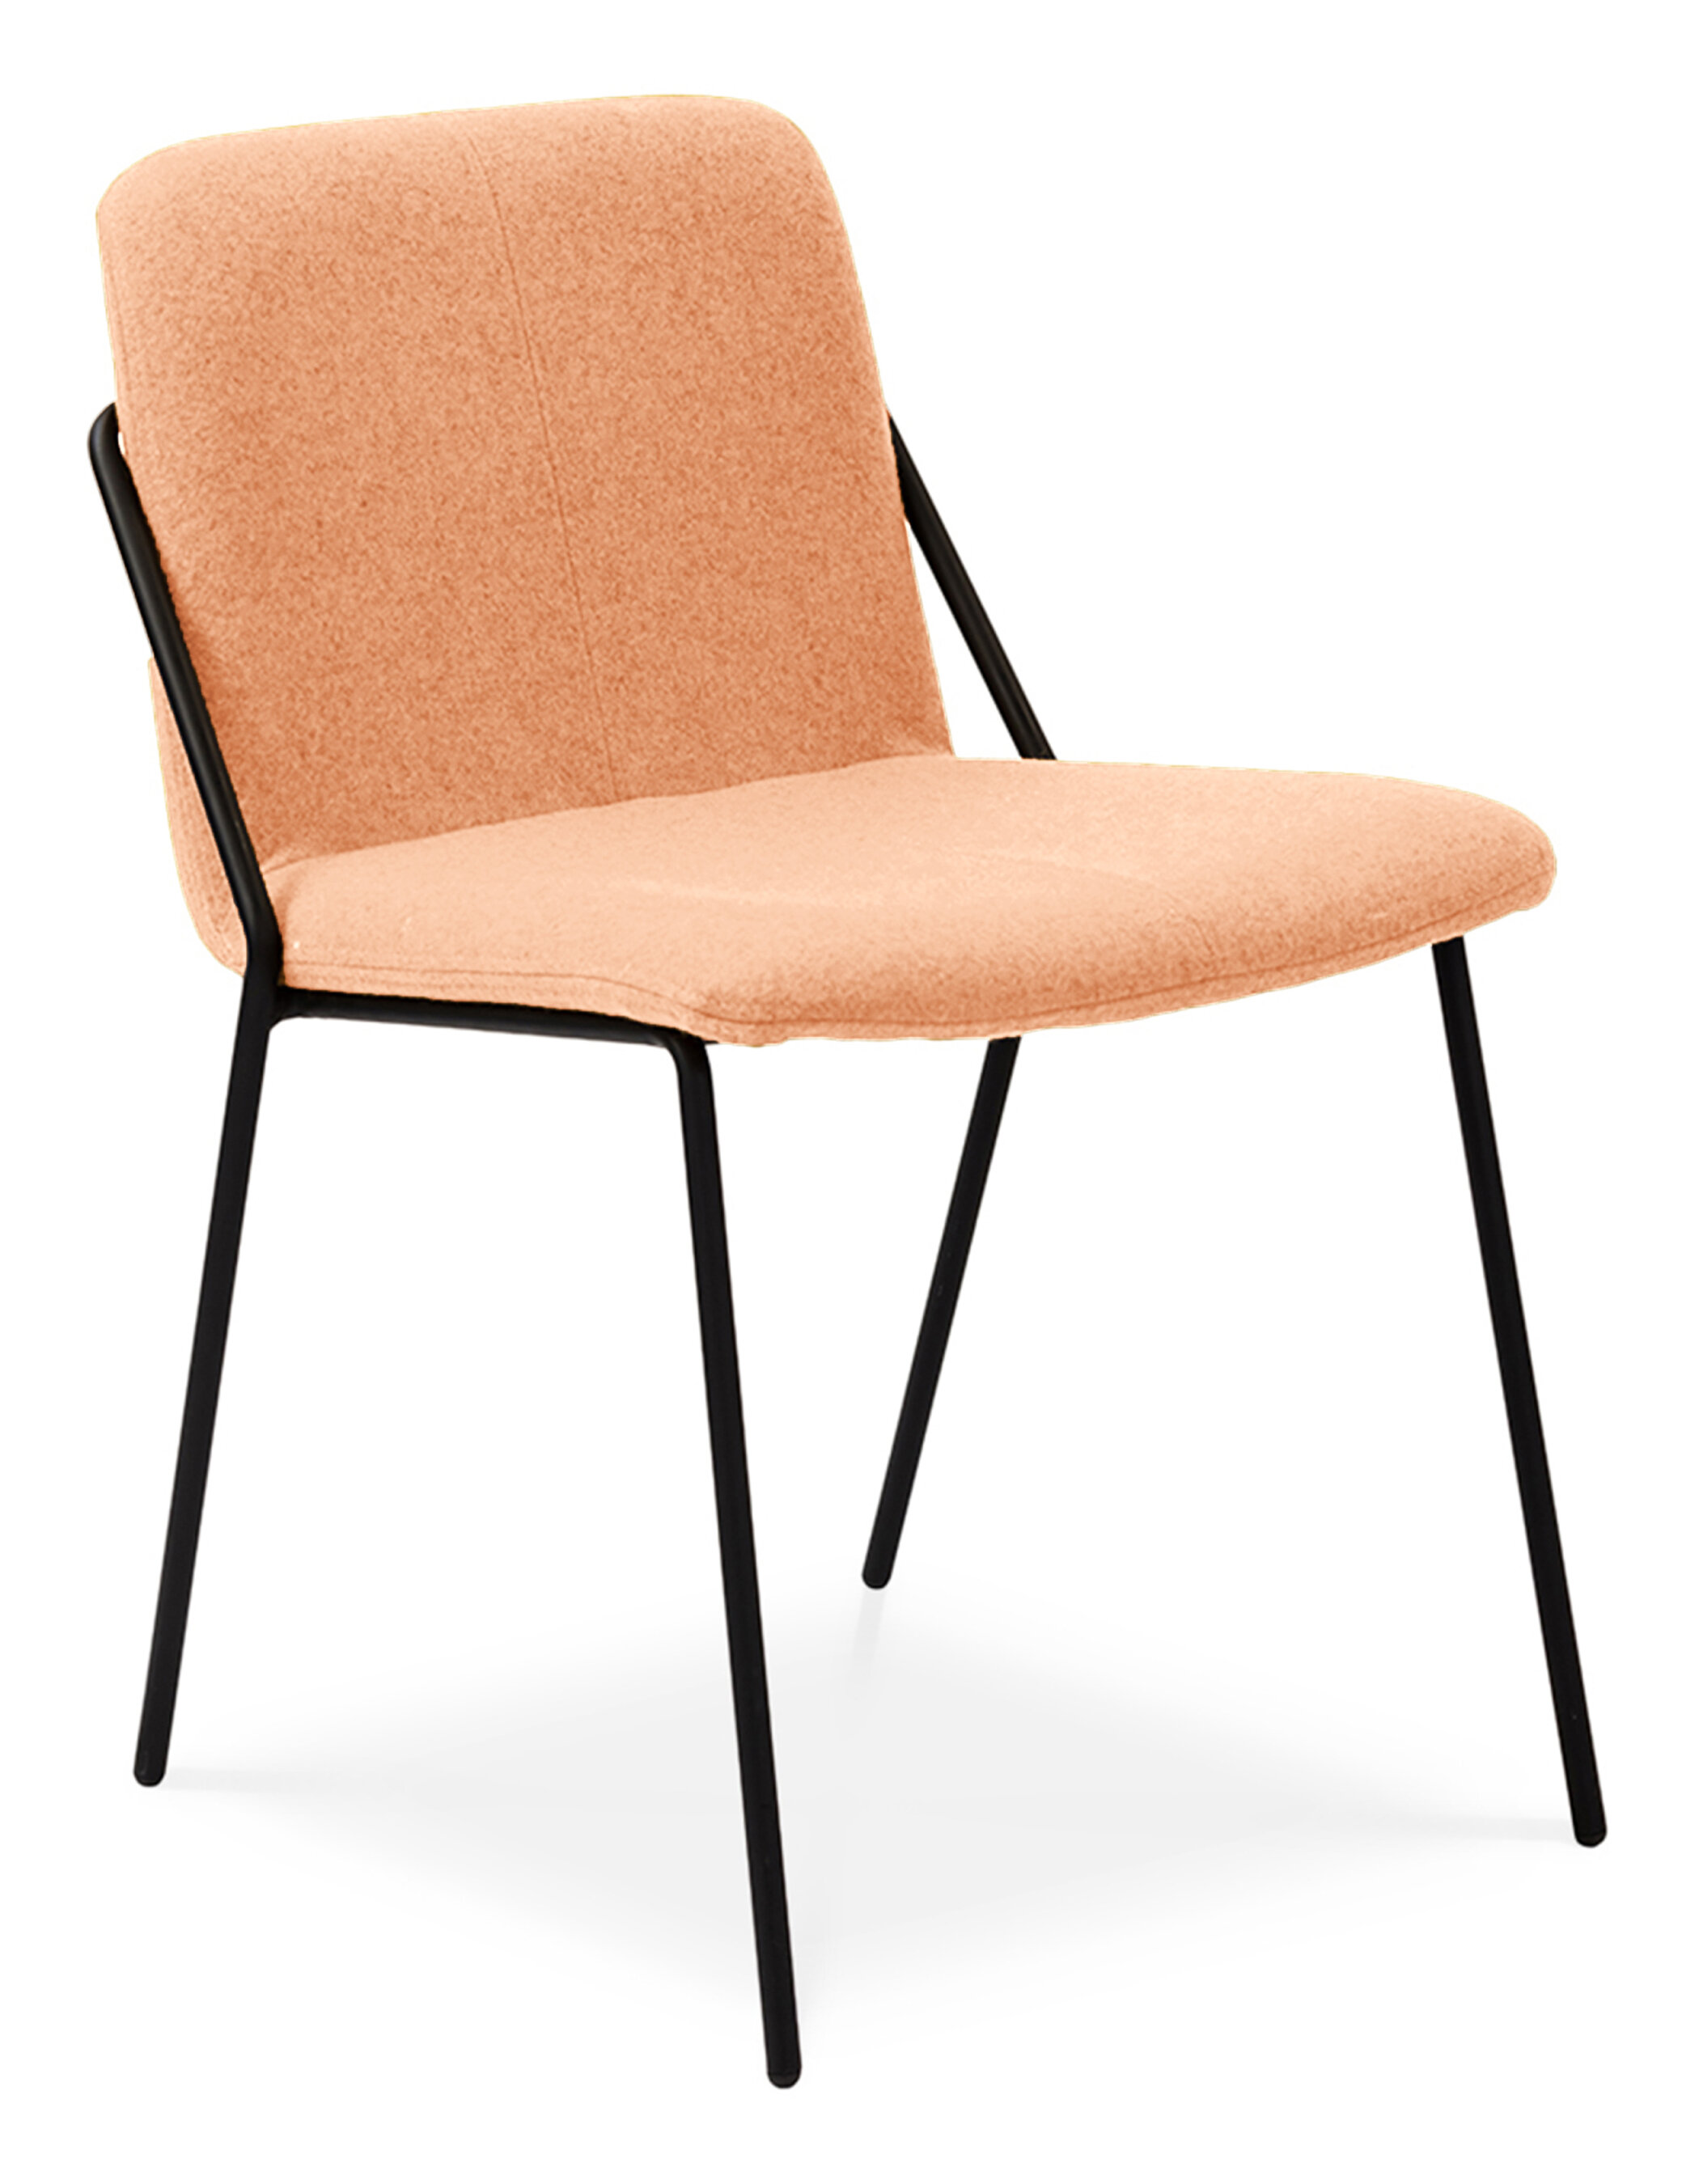 WS - Sling Side chair - ERA CSE25 SEQUENCE